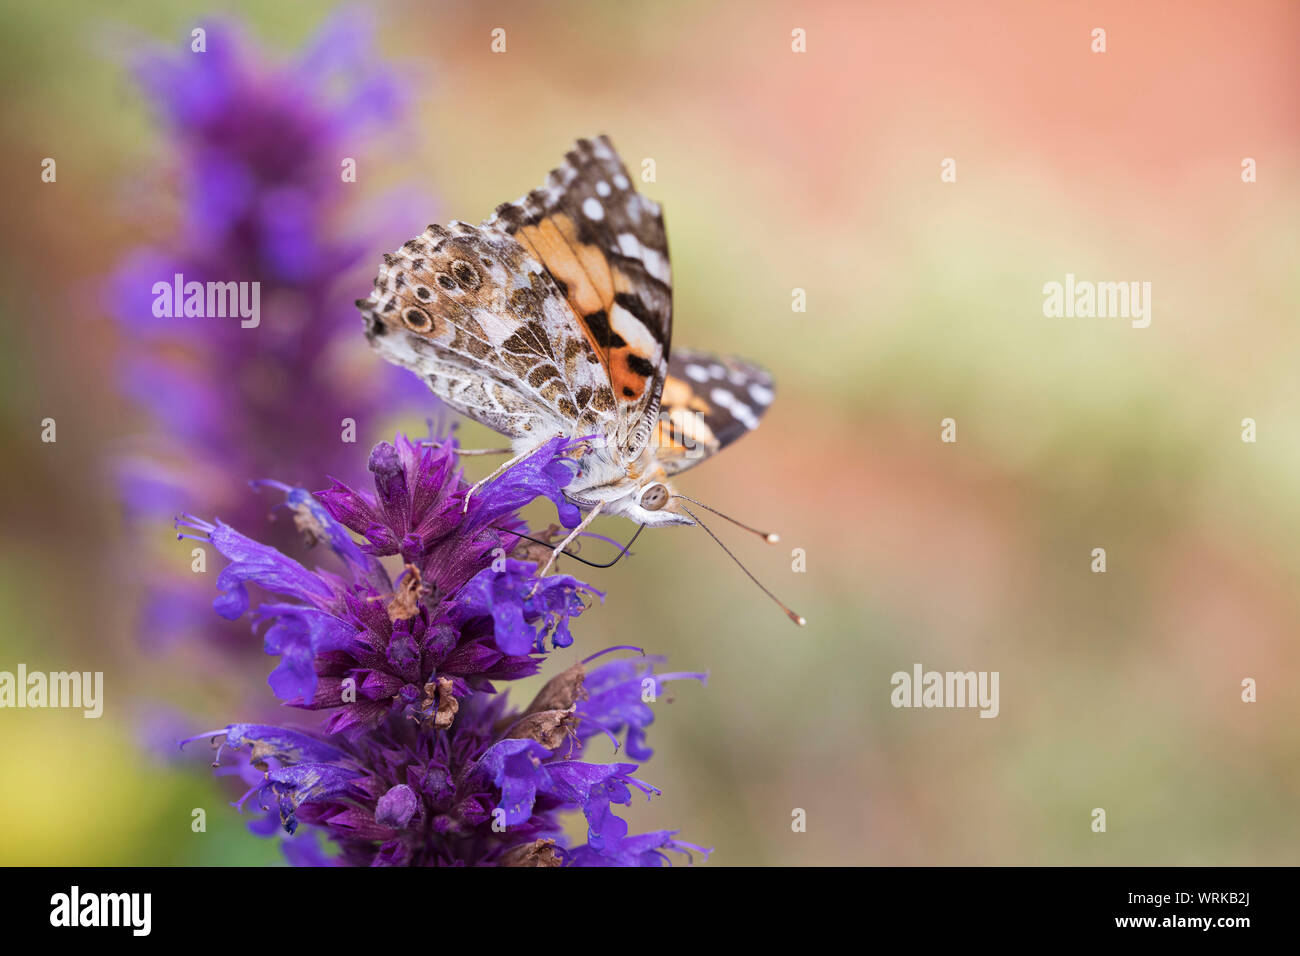 Painted Lady butterfly, Vanessa cardui, feeding on Agastache plant, Mid Wales, U.K. September 2019 Stock Photo